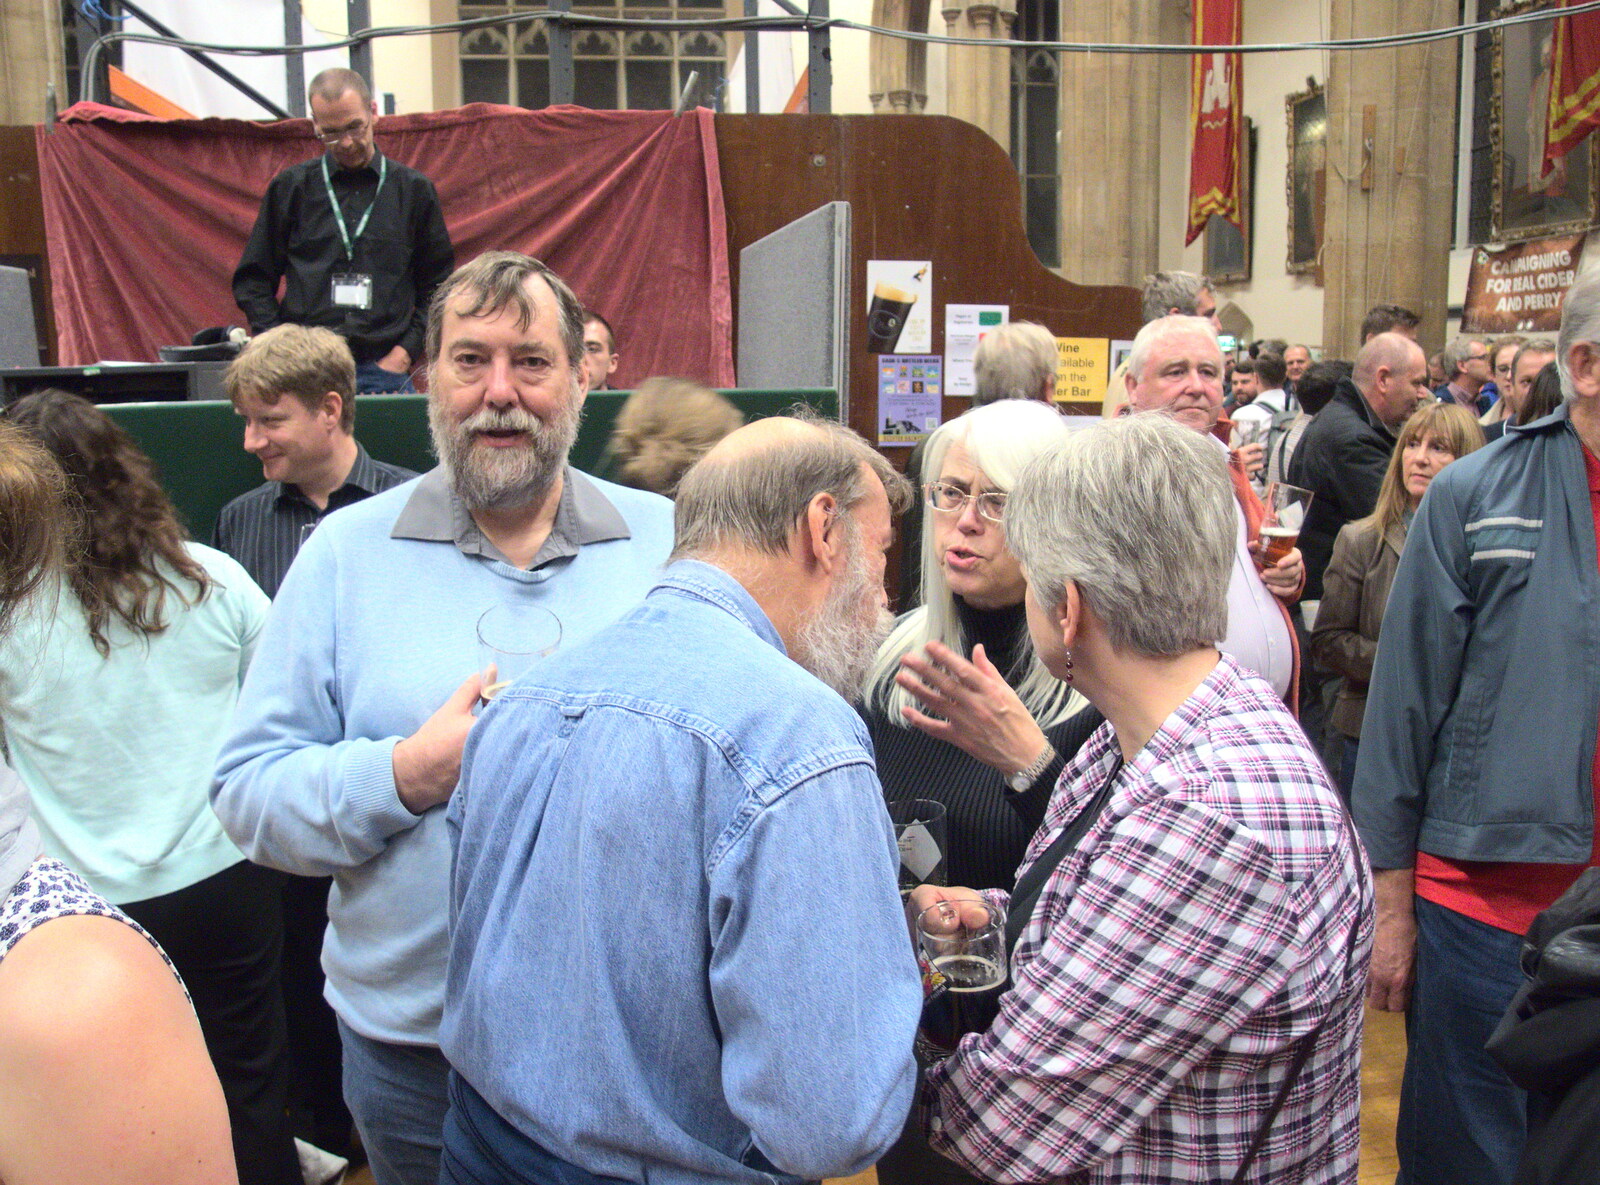 Gerry looks over from The Norwich Beer Festival, St. Andrew's Hall, Norwich, Norfolk - 26th October 2016